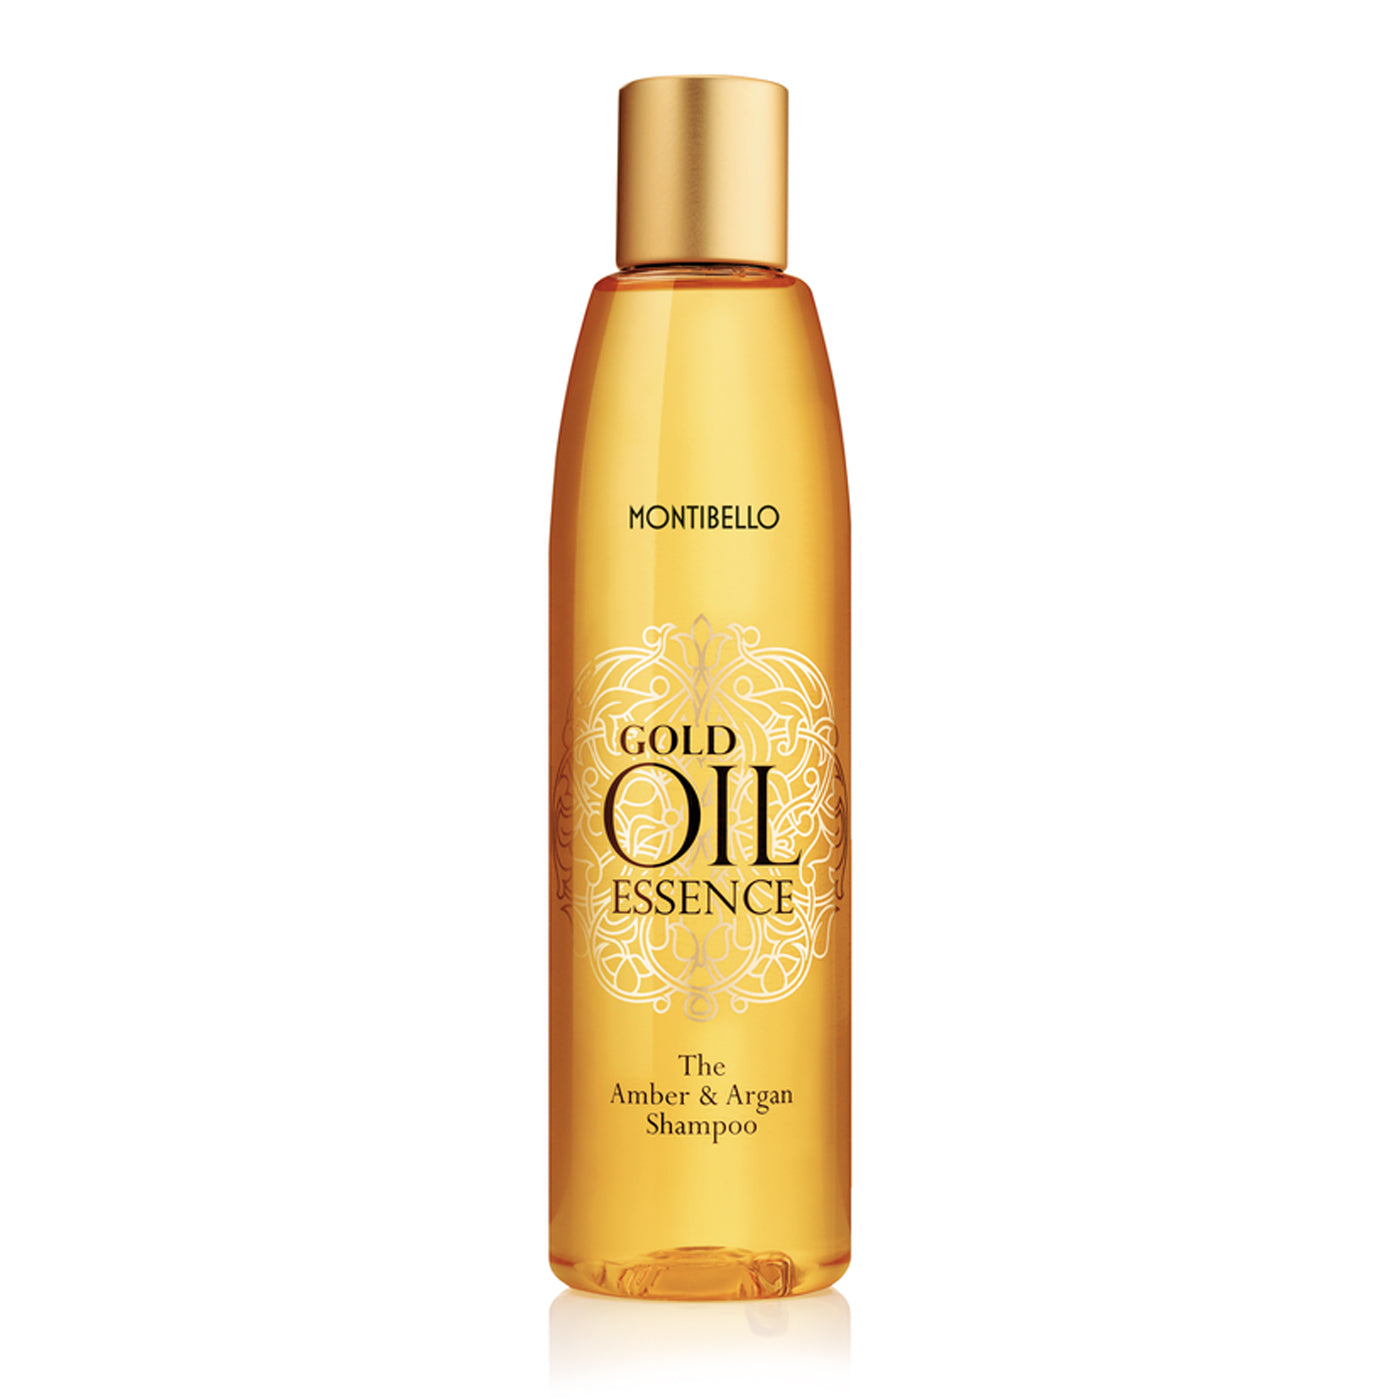 Montibello Gold Oil Essence Shampoo (250ml) - Ultimate Hair and Beauty